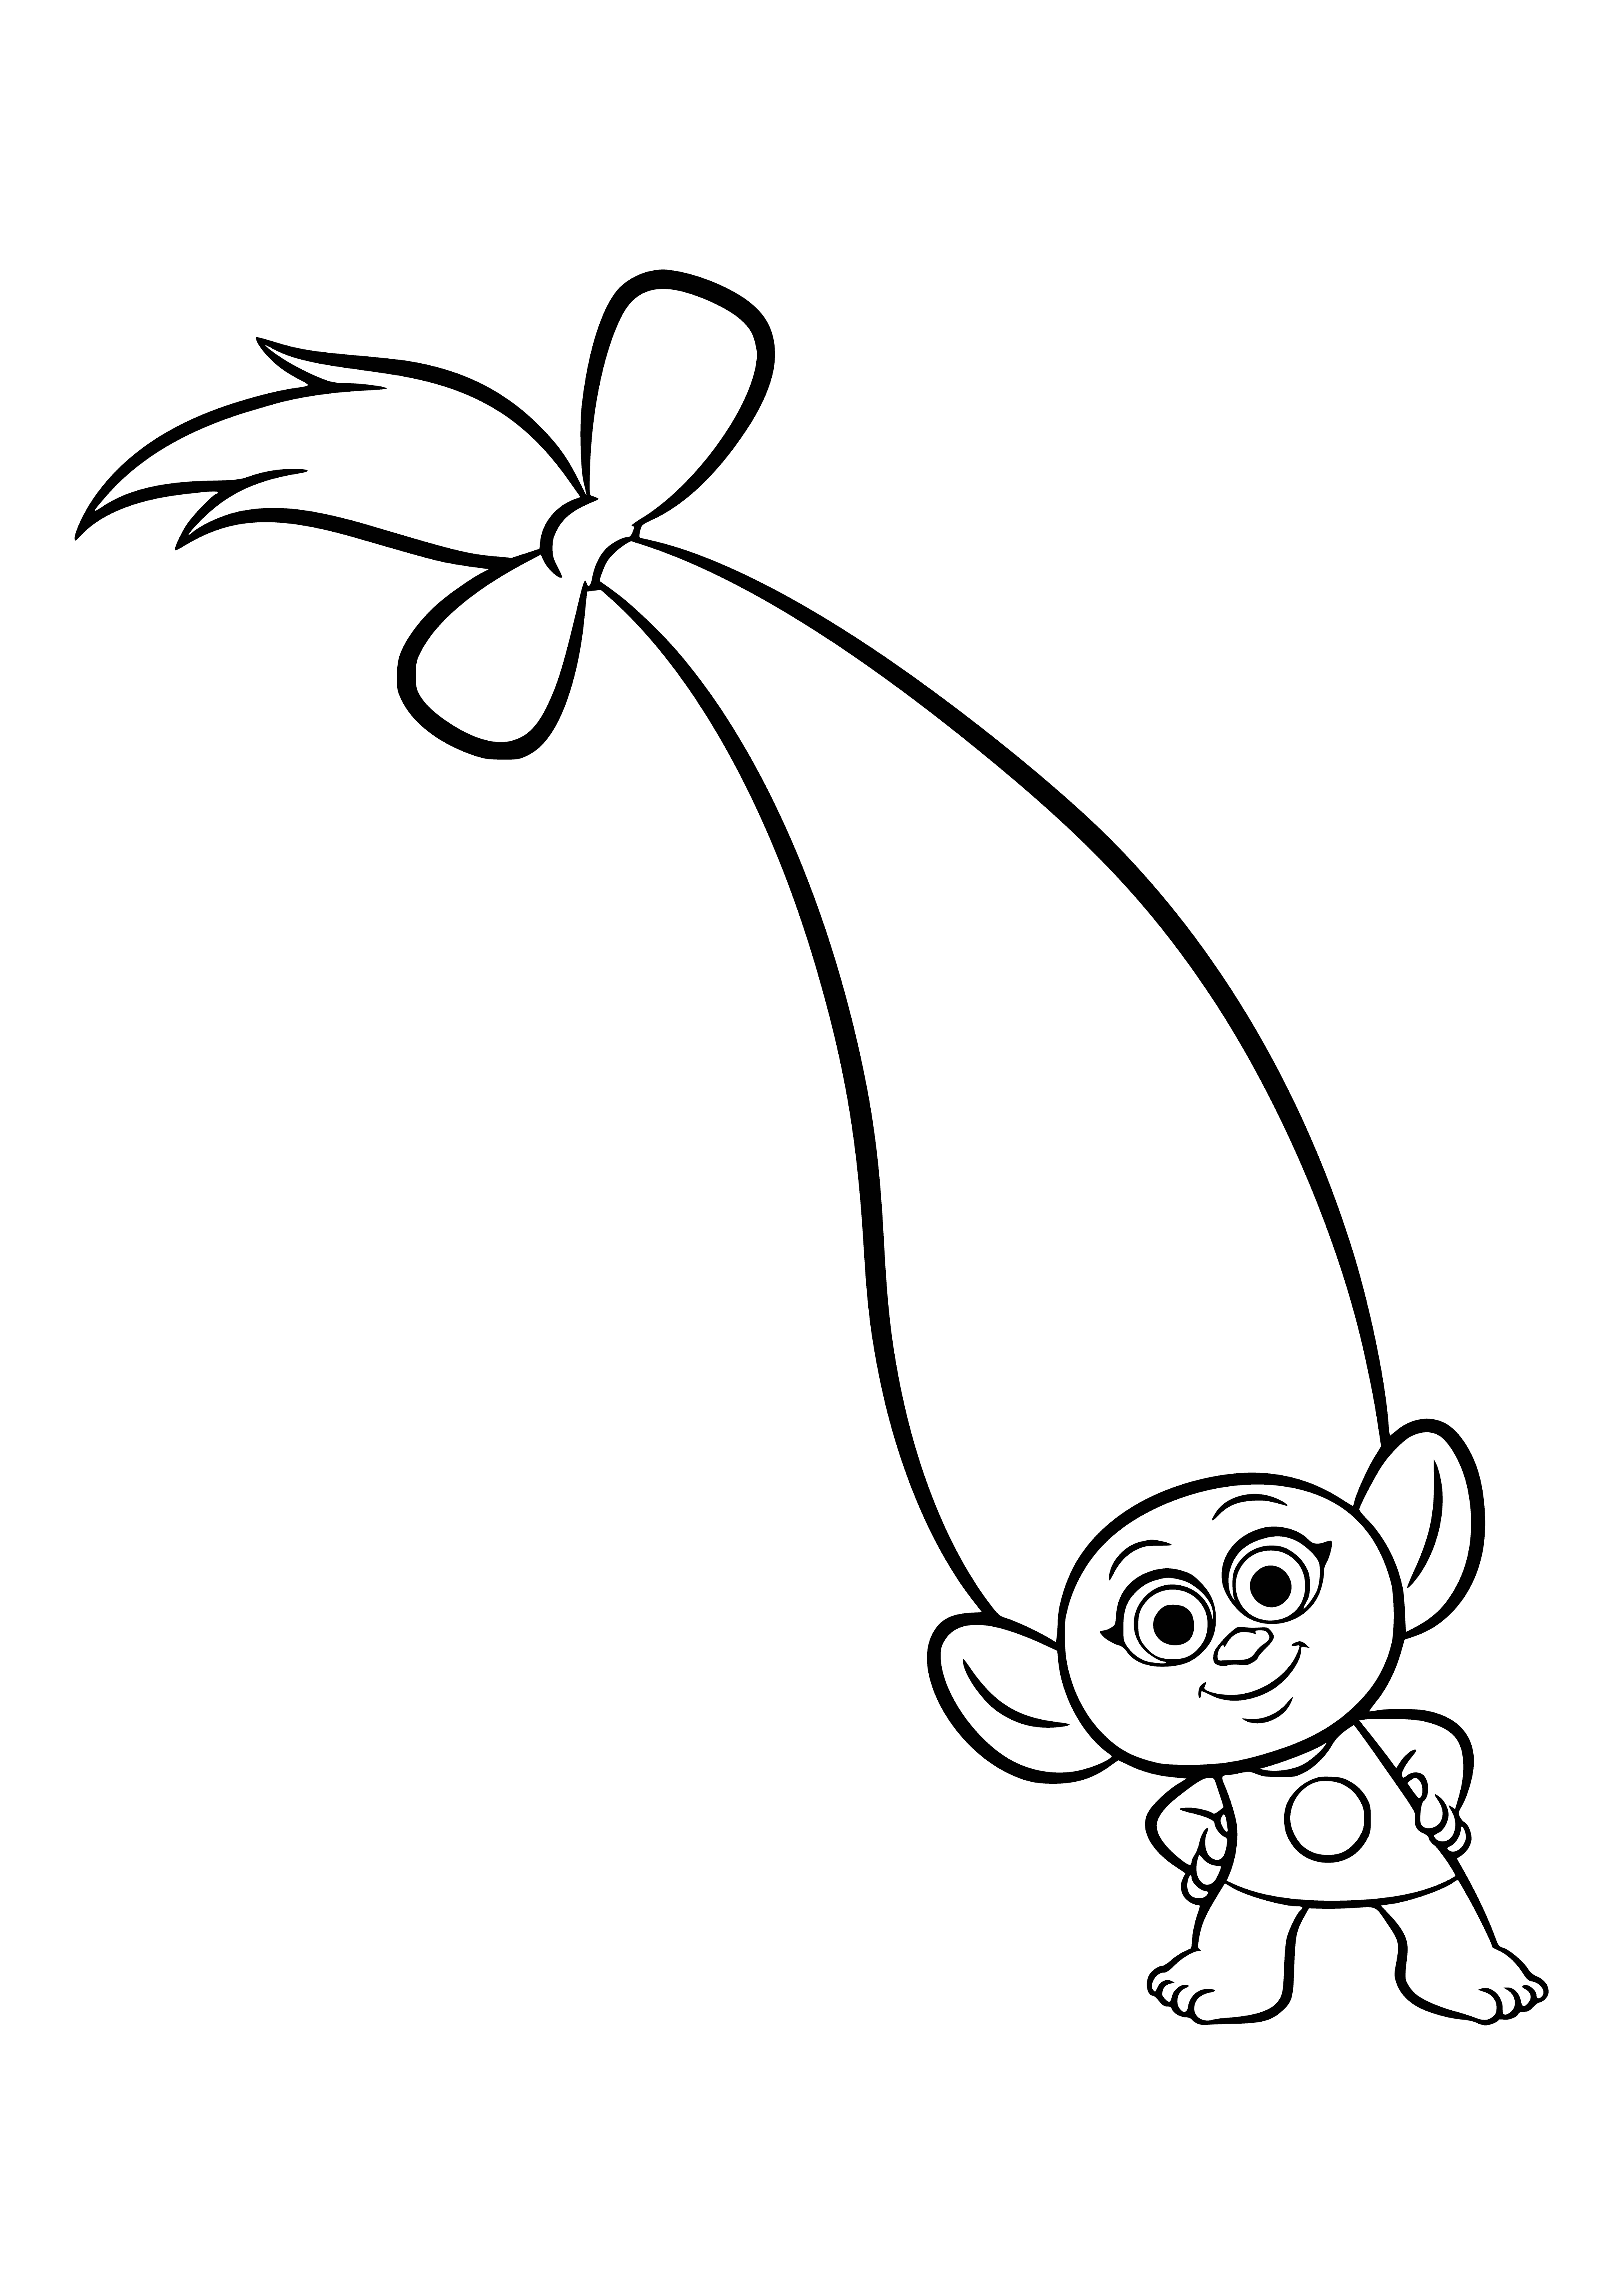 Crumb coloring page